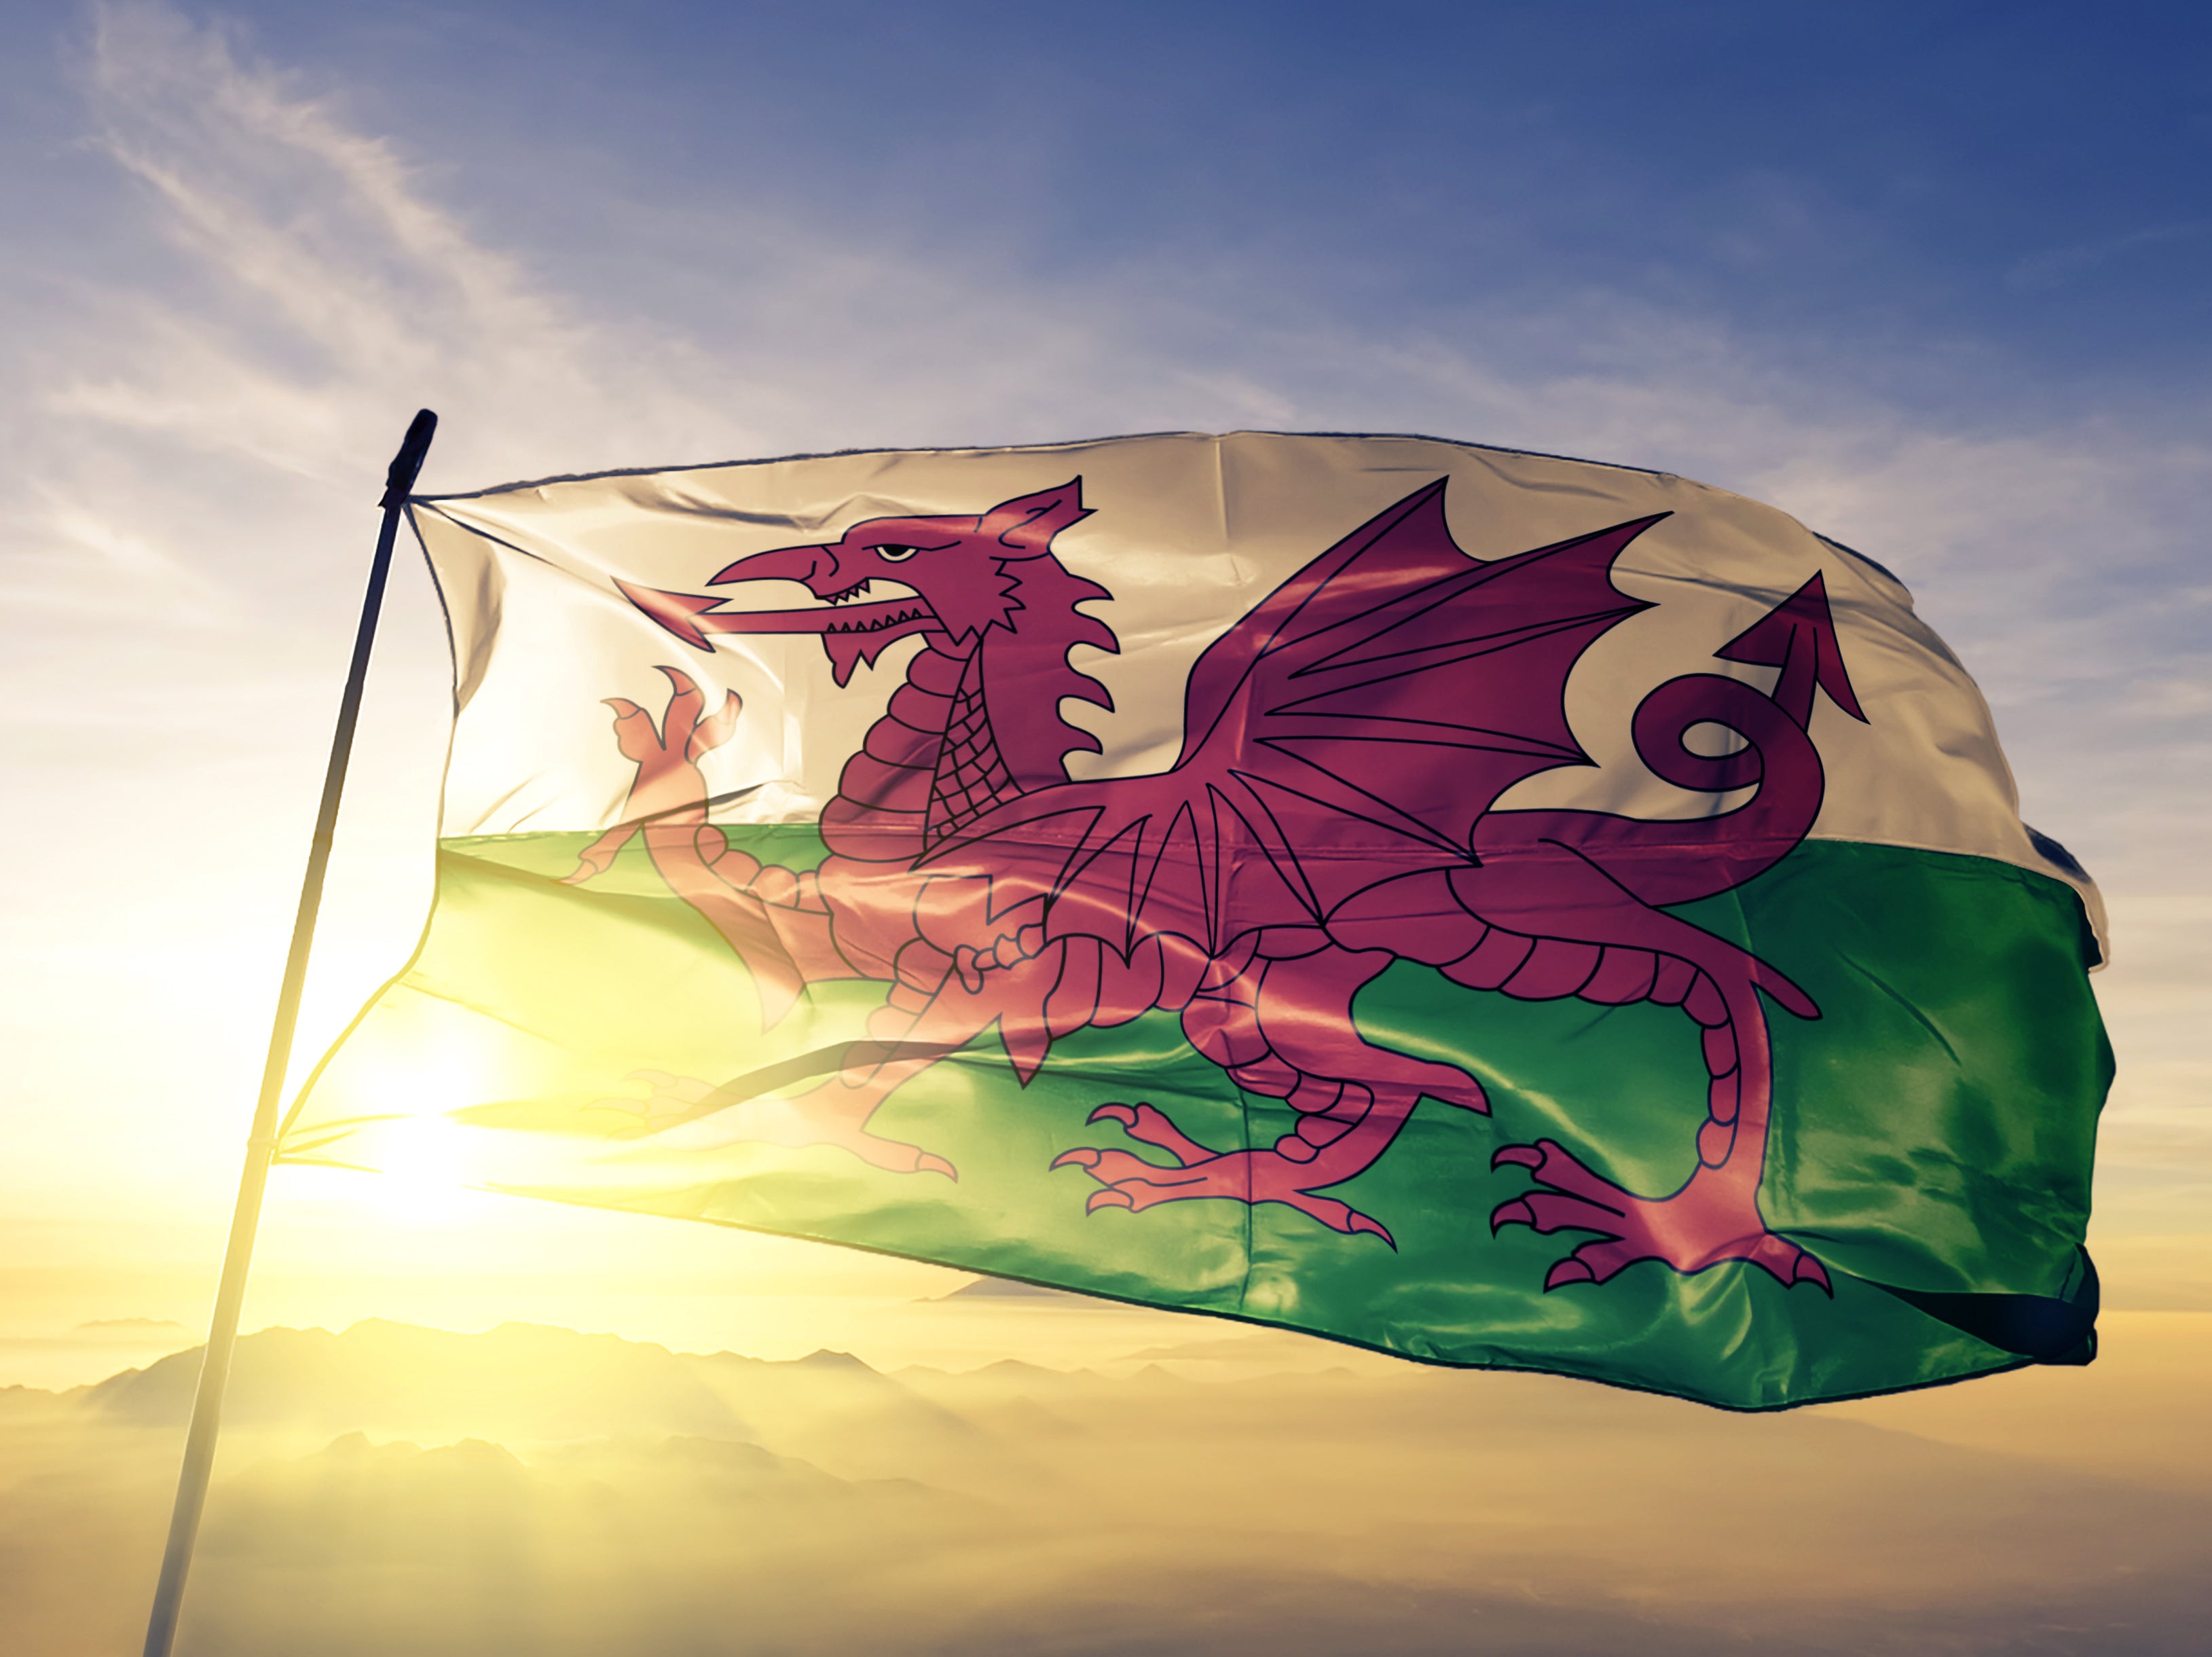 Wales is brimming with greatness, and replete with culture